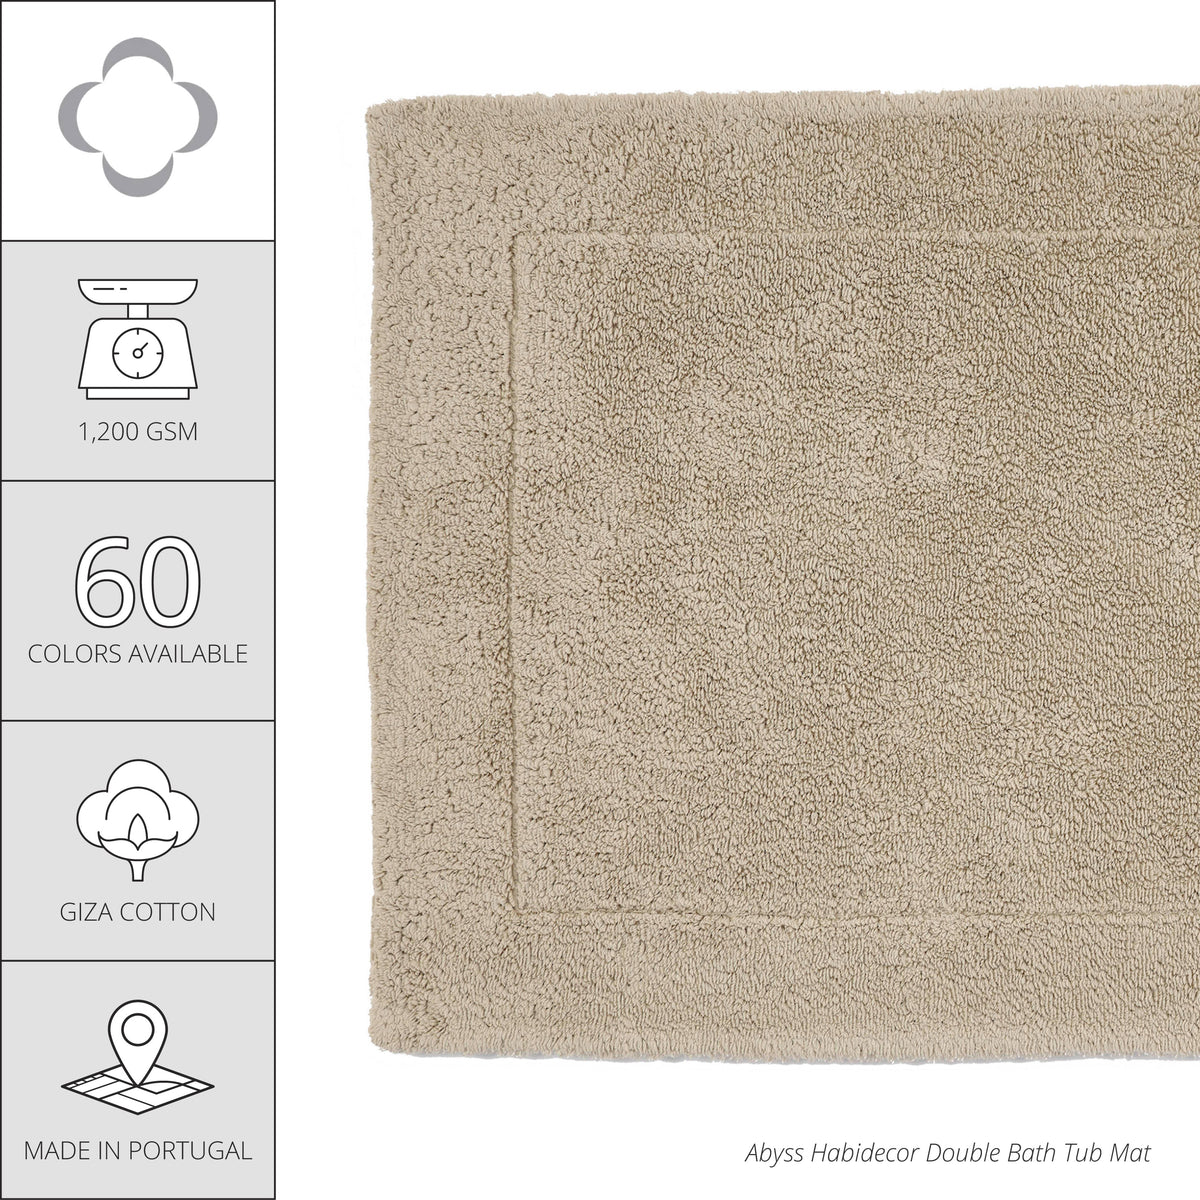 Abyss Double Bath Tub Mat - Figue (401)